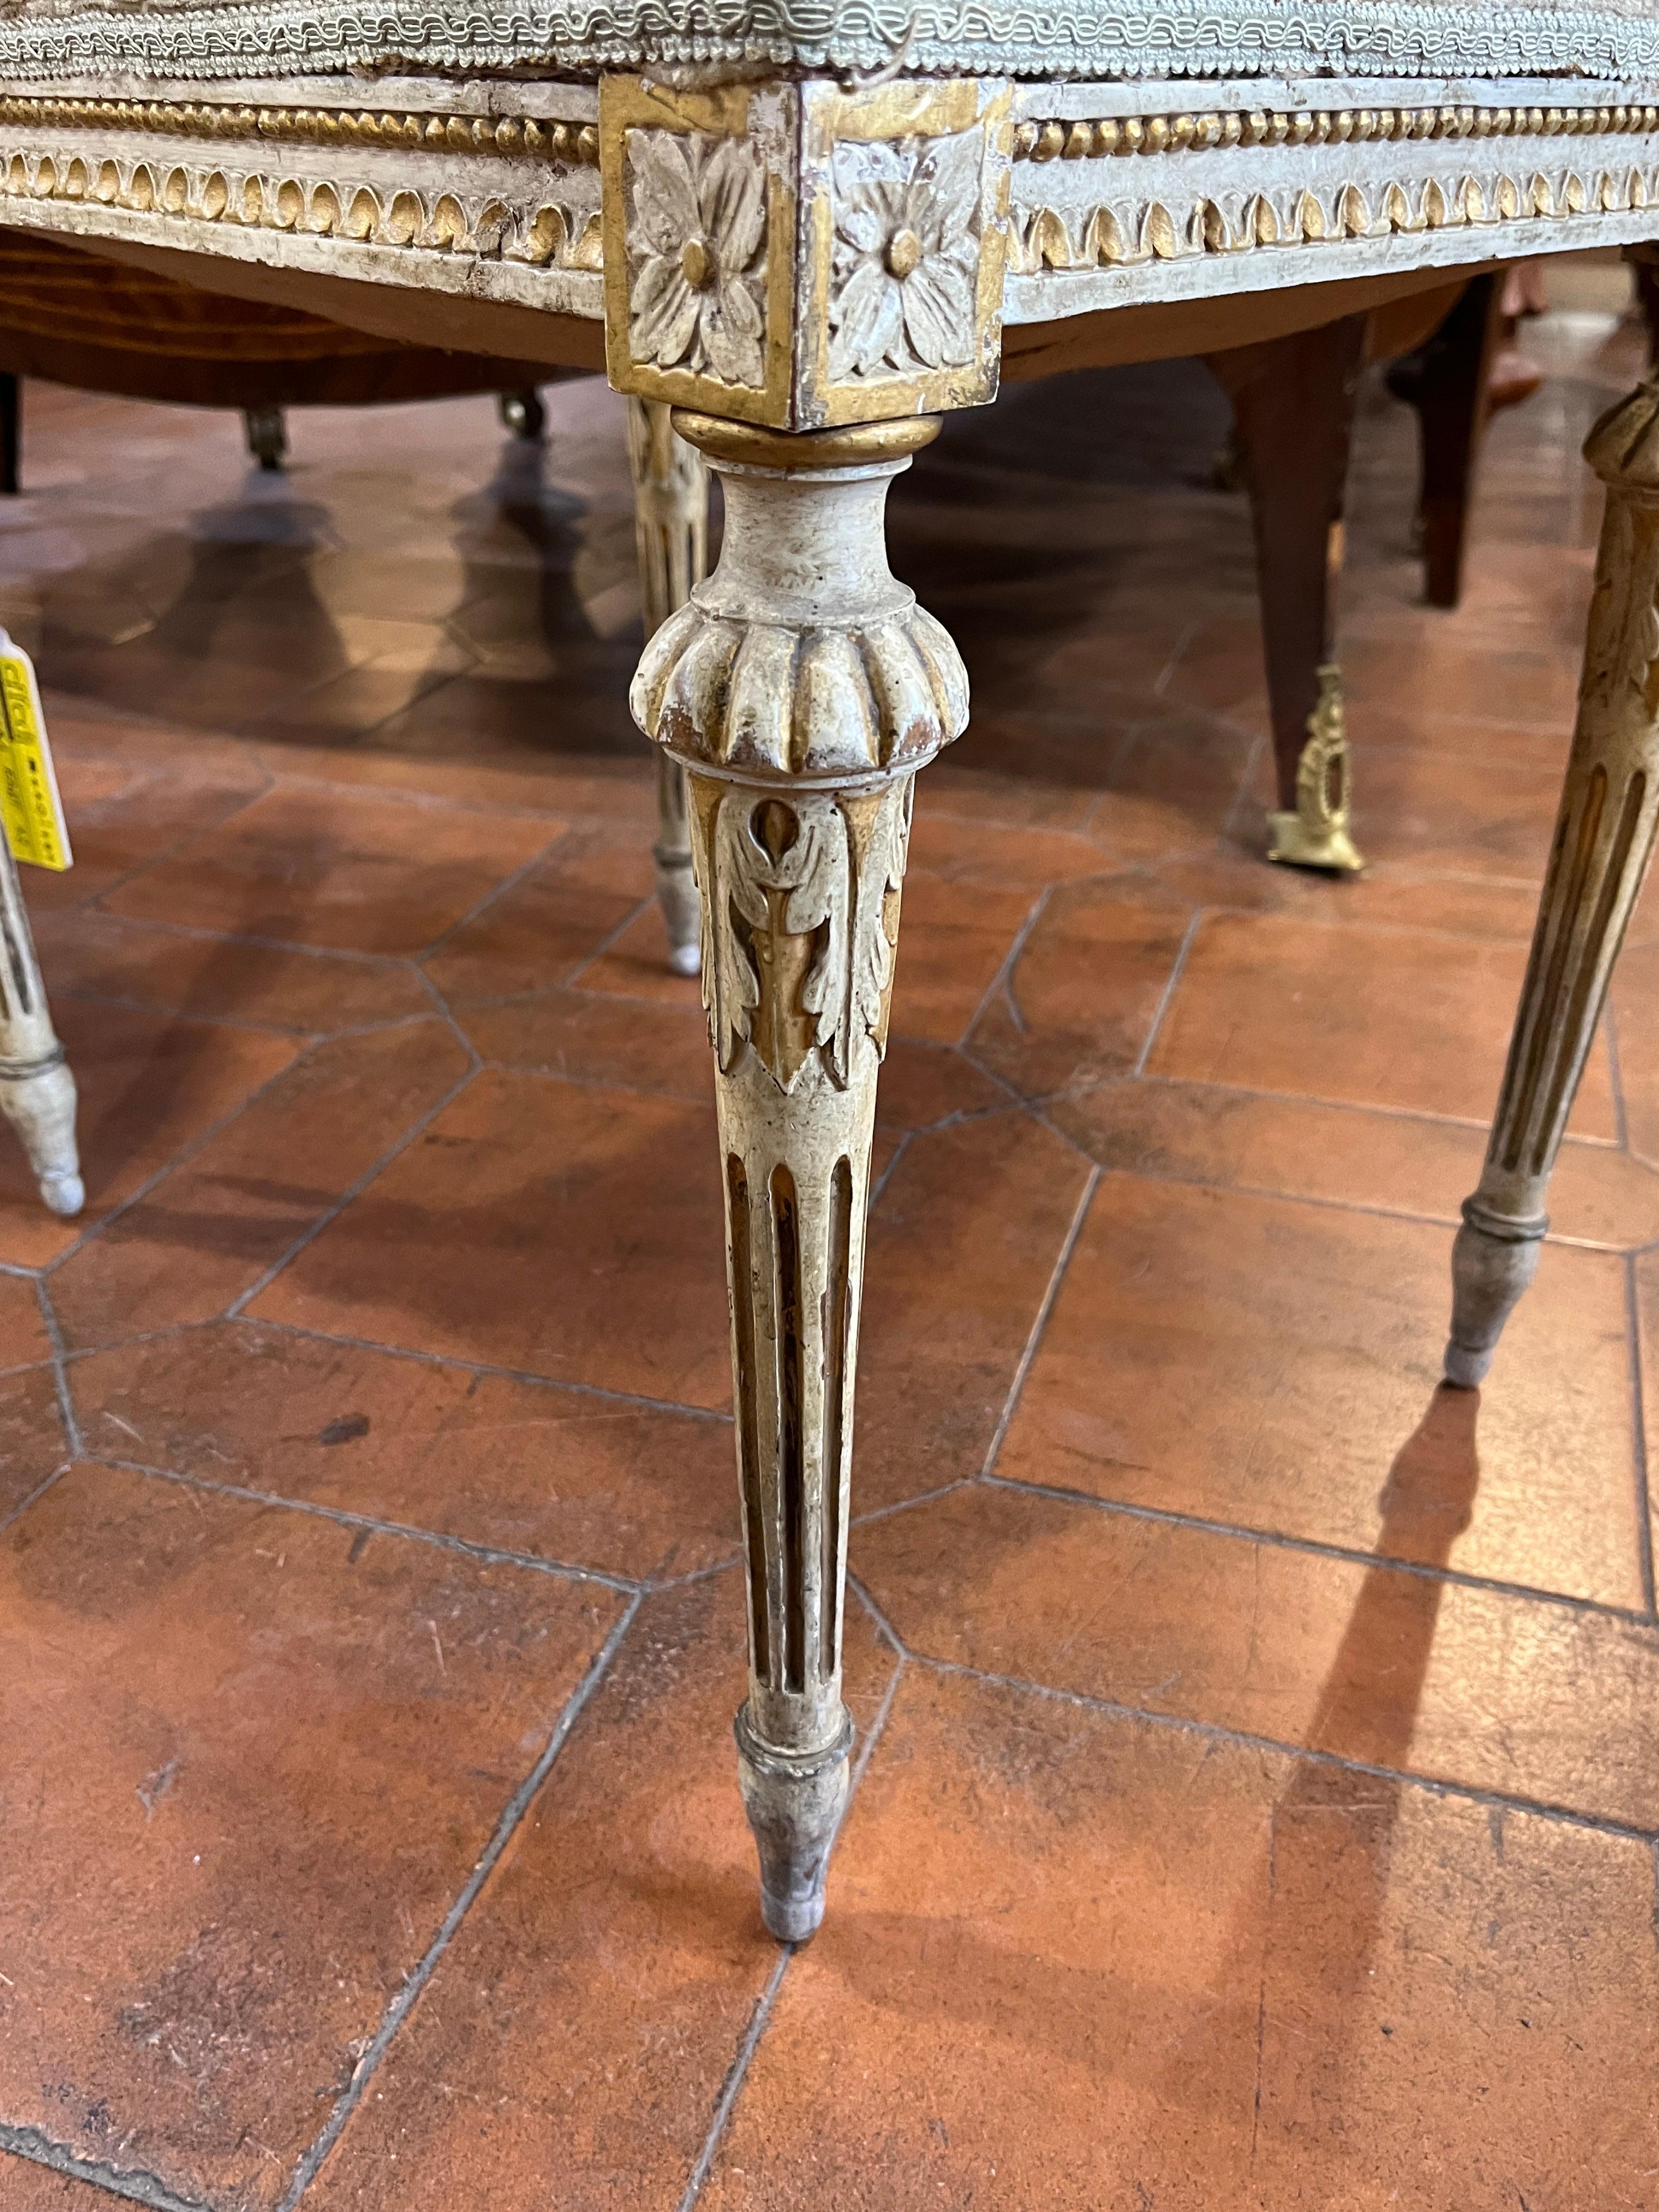 Fantastic pair of Venetian stools, Louis XVI era, circa 1780-90. Lacquered and gilded, classic fluted leg with acanthus leaves and border embellished with squares with flowers and a slight greek running around the entire perimeter.Very good state of